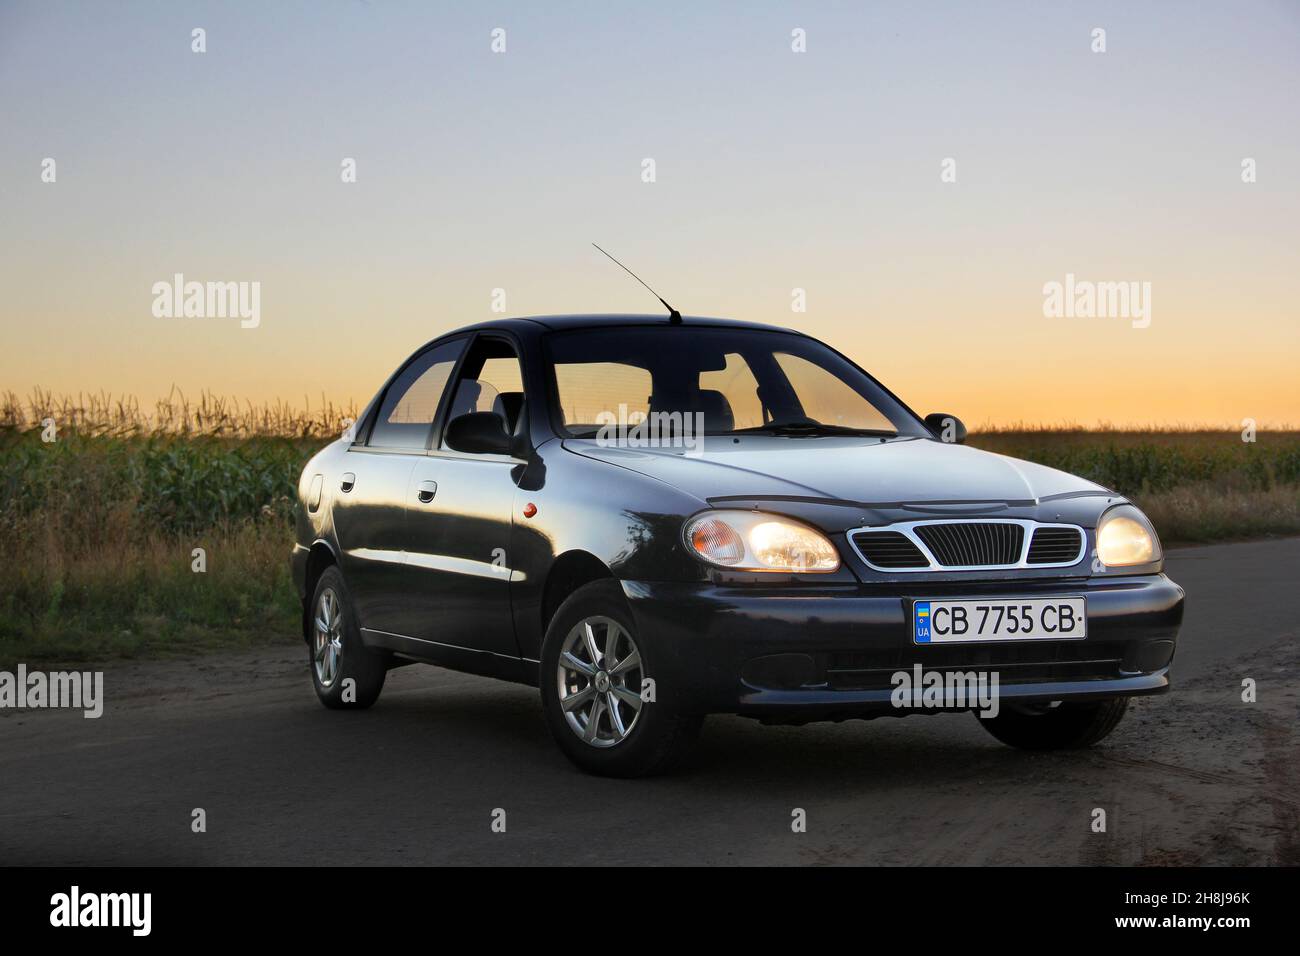 Chernihiv, Ukraine - September 9, 2020: Daewoo Sens on the background of a field and sunset Stock Photo